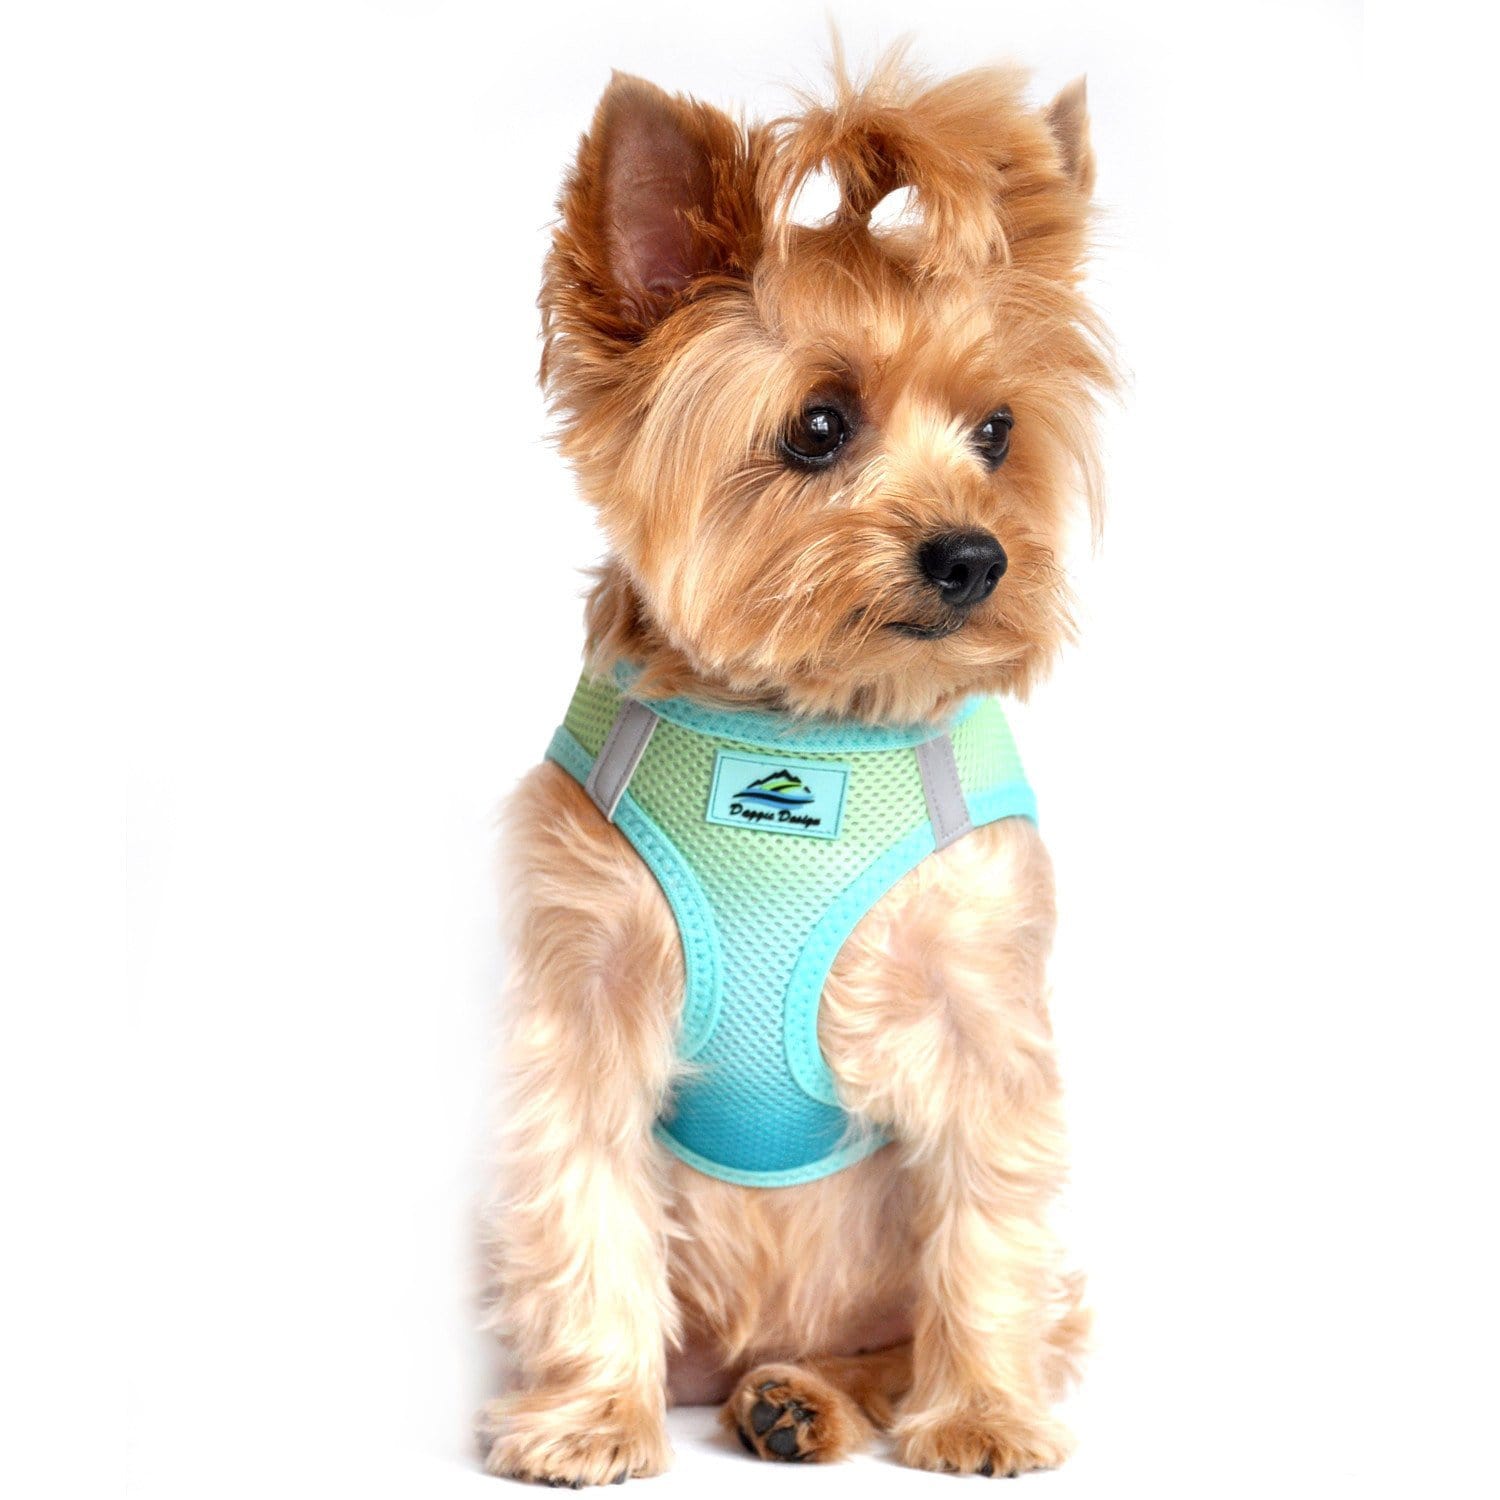 How to put Dog Harness on